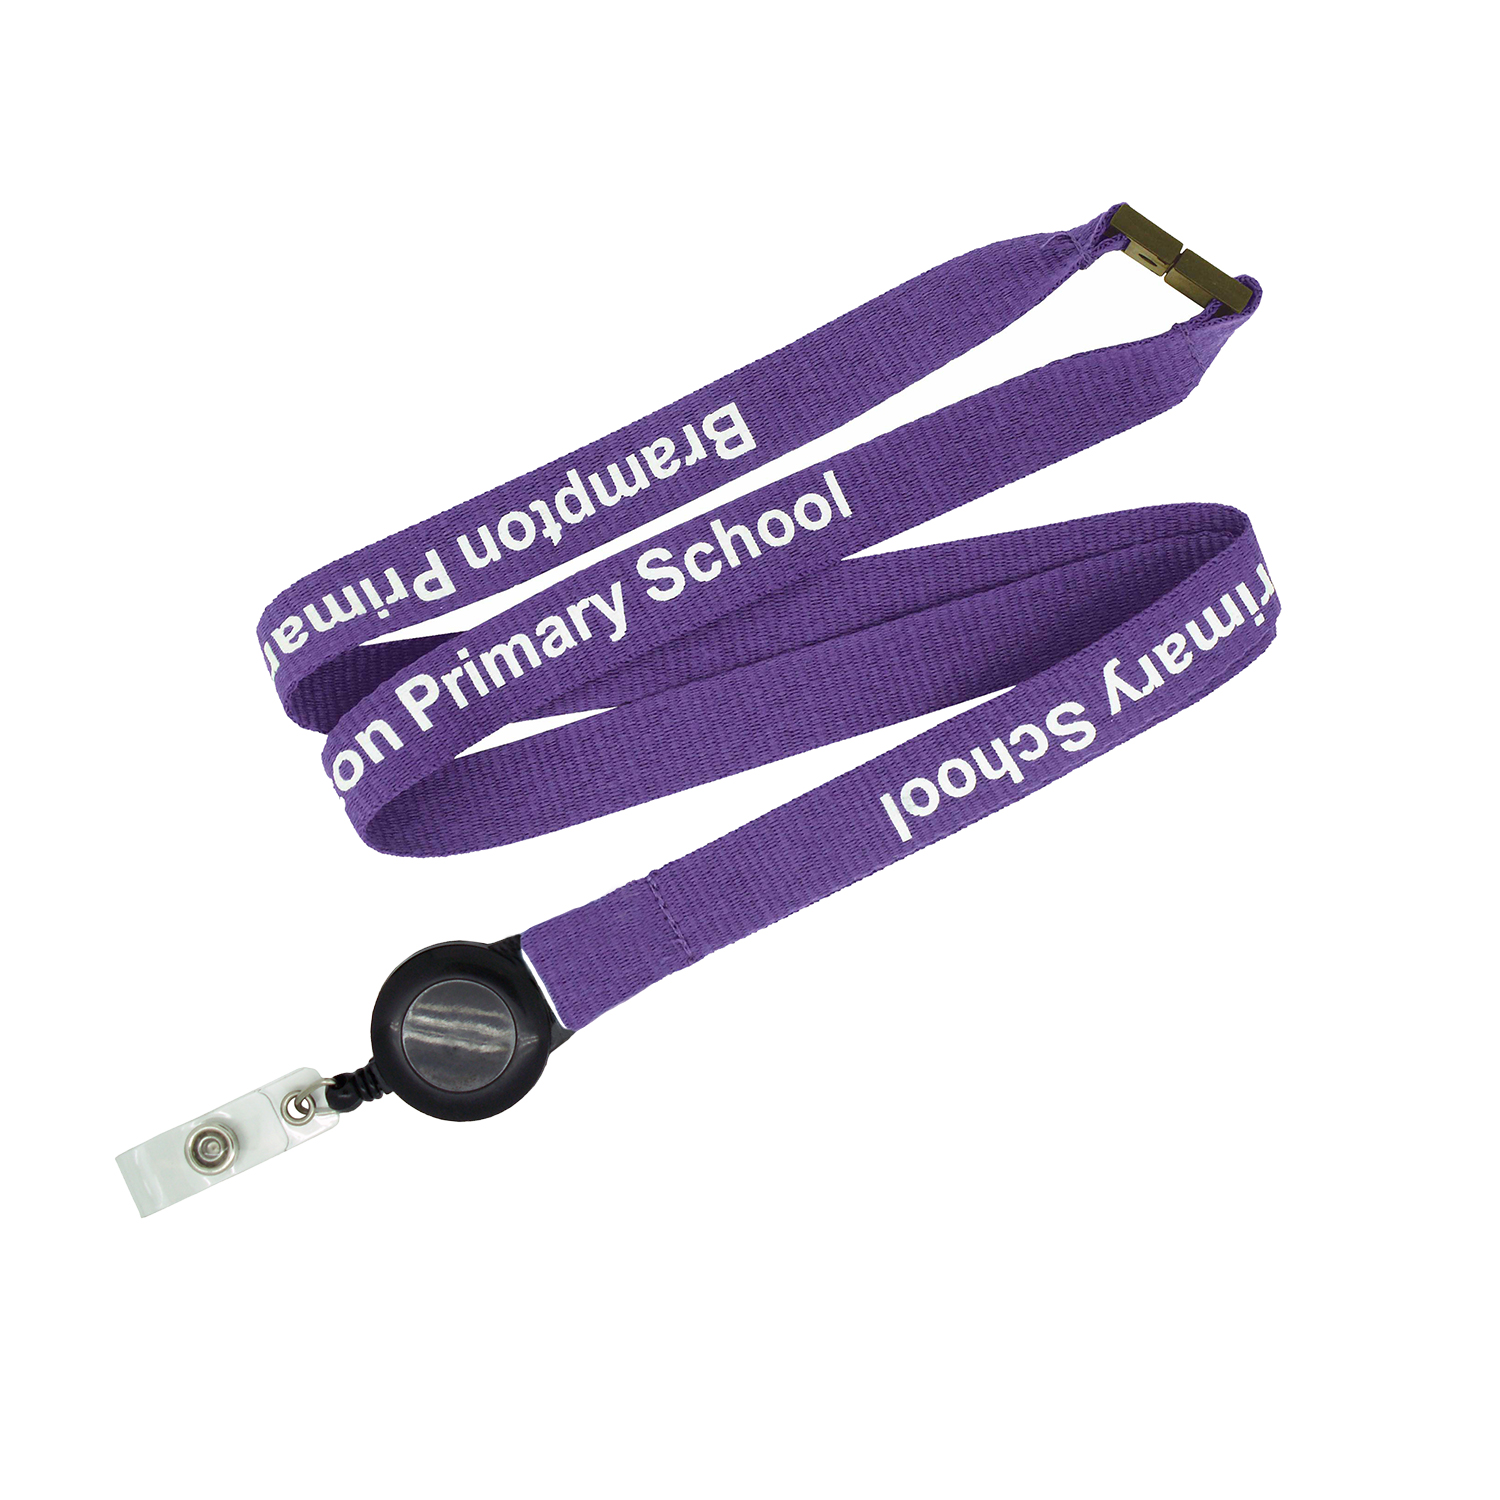 https://images-stage.pinpoint.promo/256%20-%20Flat%20Ribbed%20Lanyard%20with%20Pull%20Reel/images/Flat%20Ribbed%20Lanyards%20purple%20with%20pull%20reel.jpg